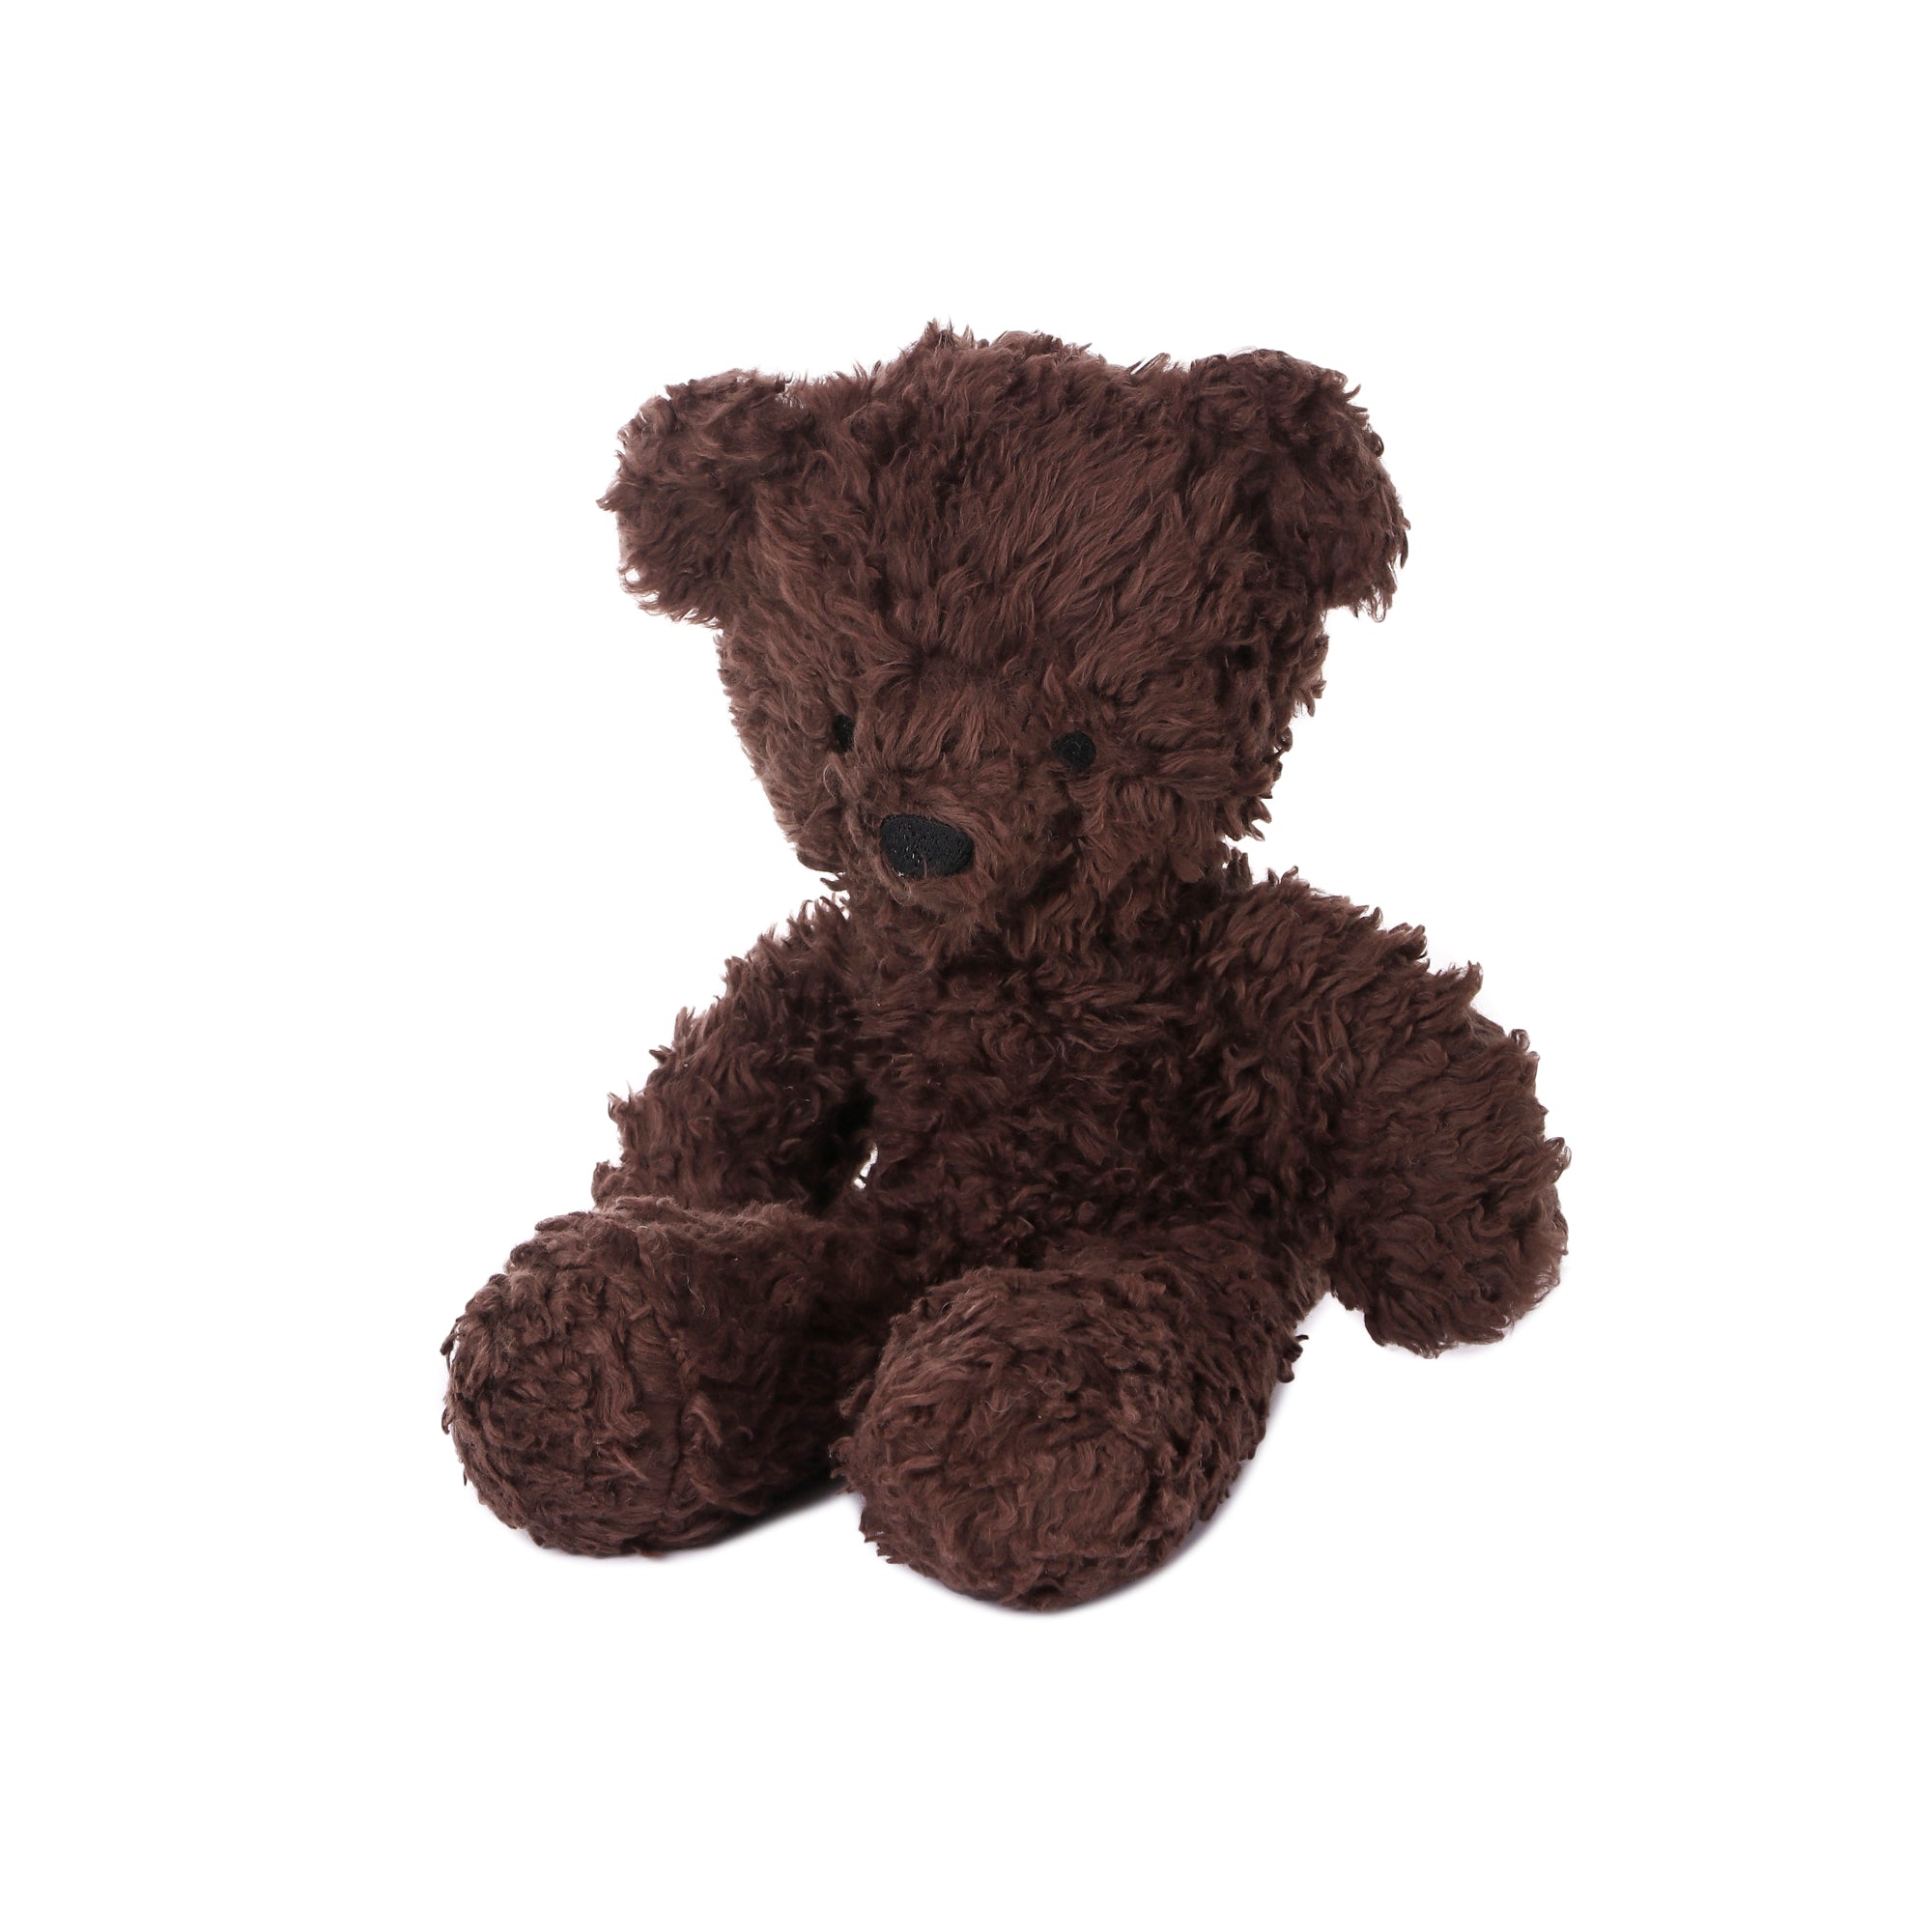 8 Brown Sugar Bear with shirt and one color imprint